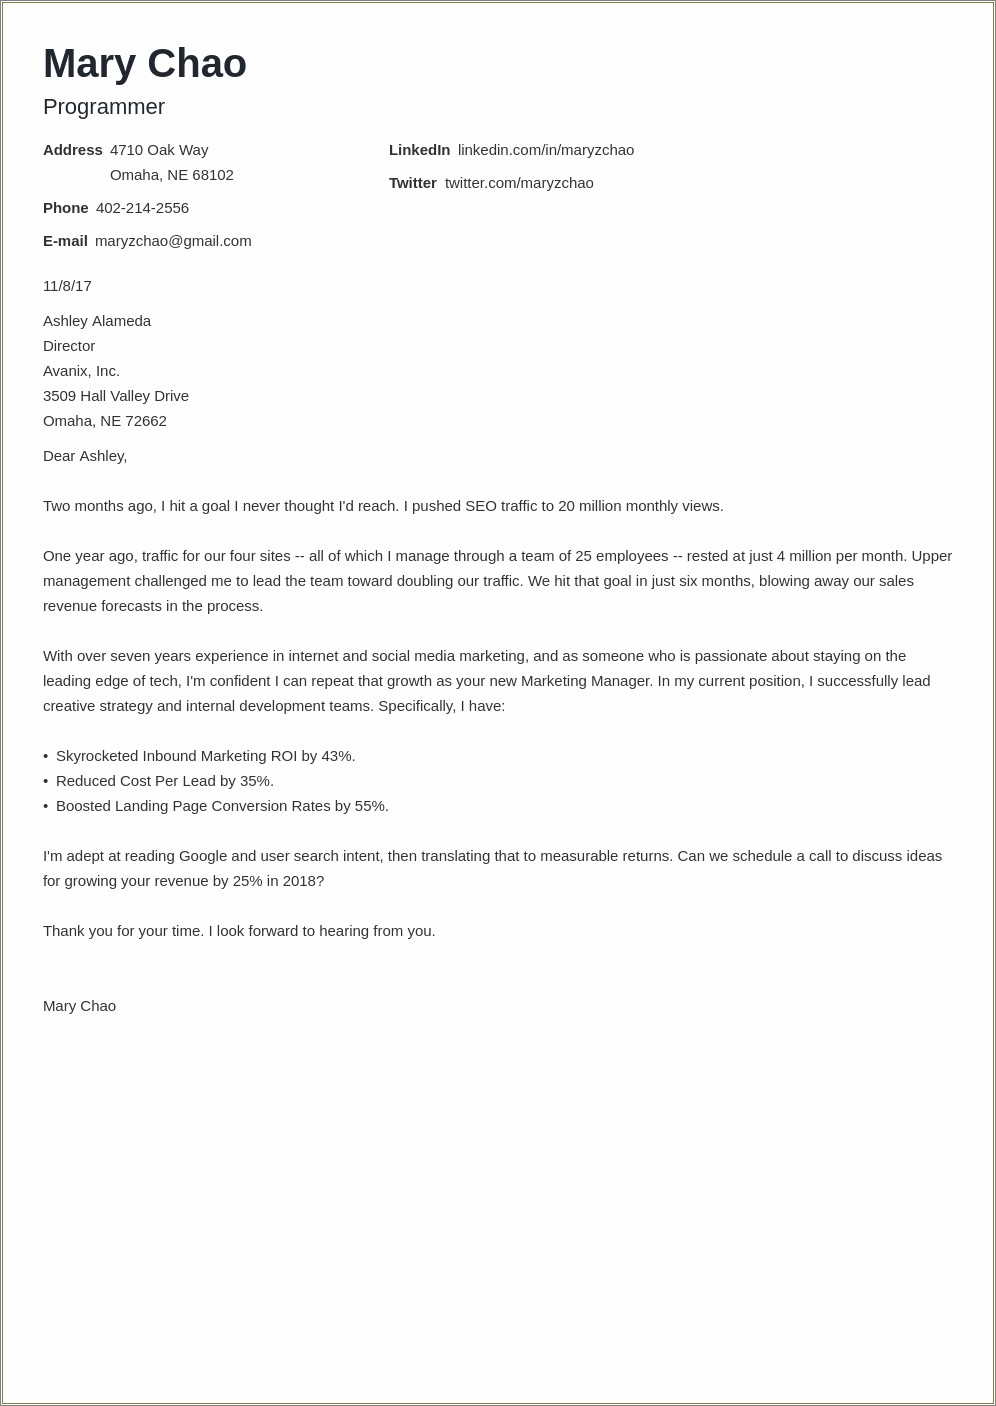 Resume And Cover Letter Same Format